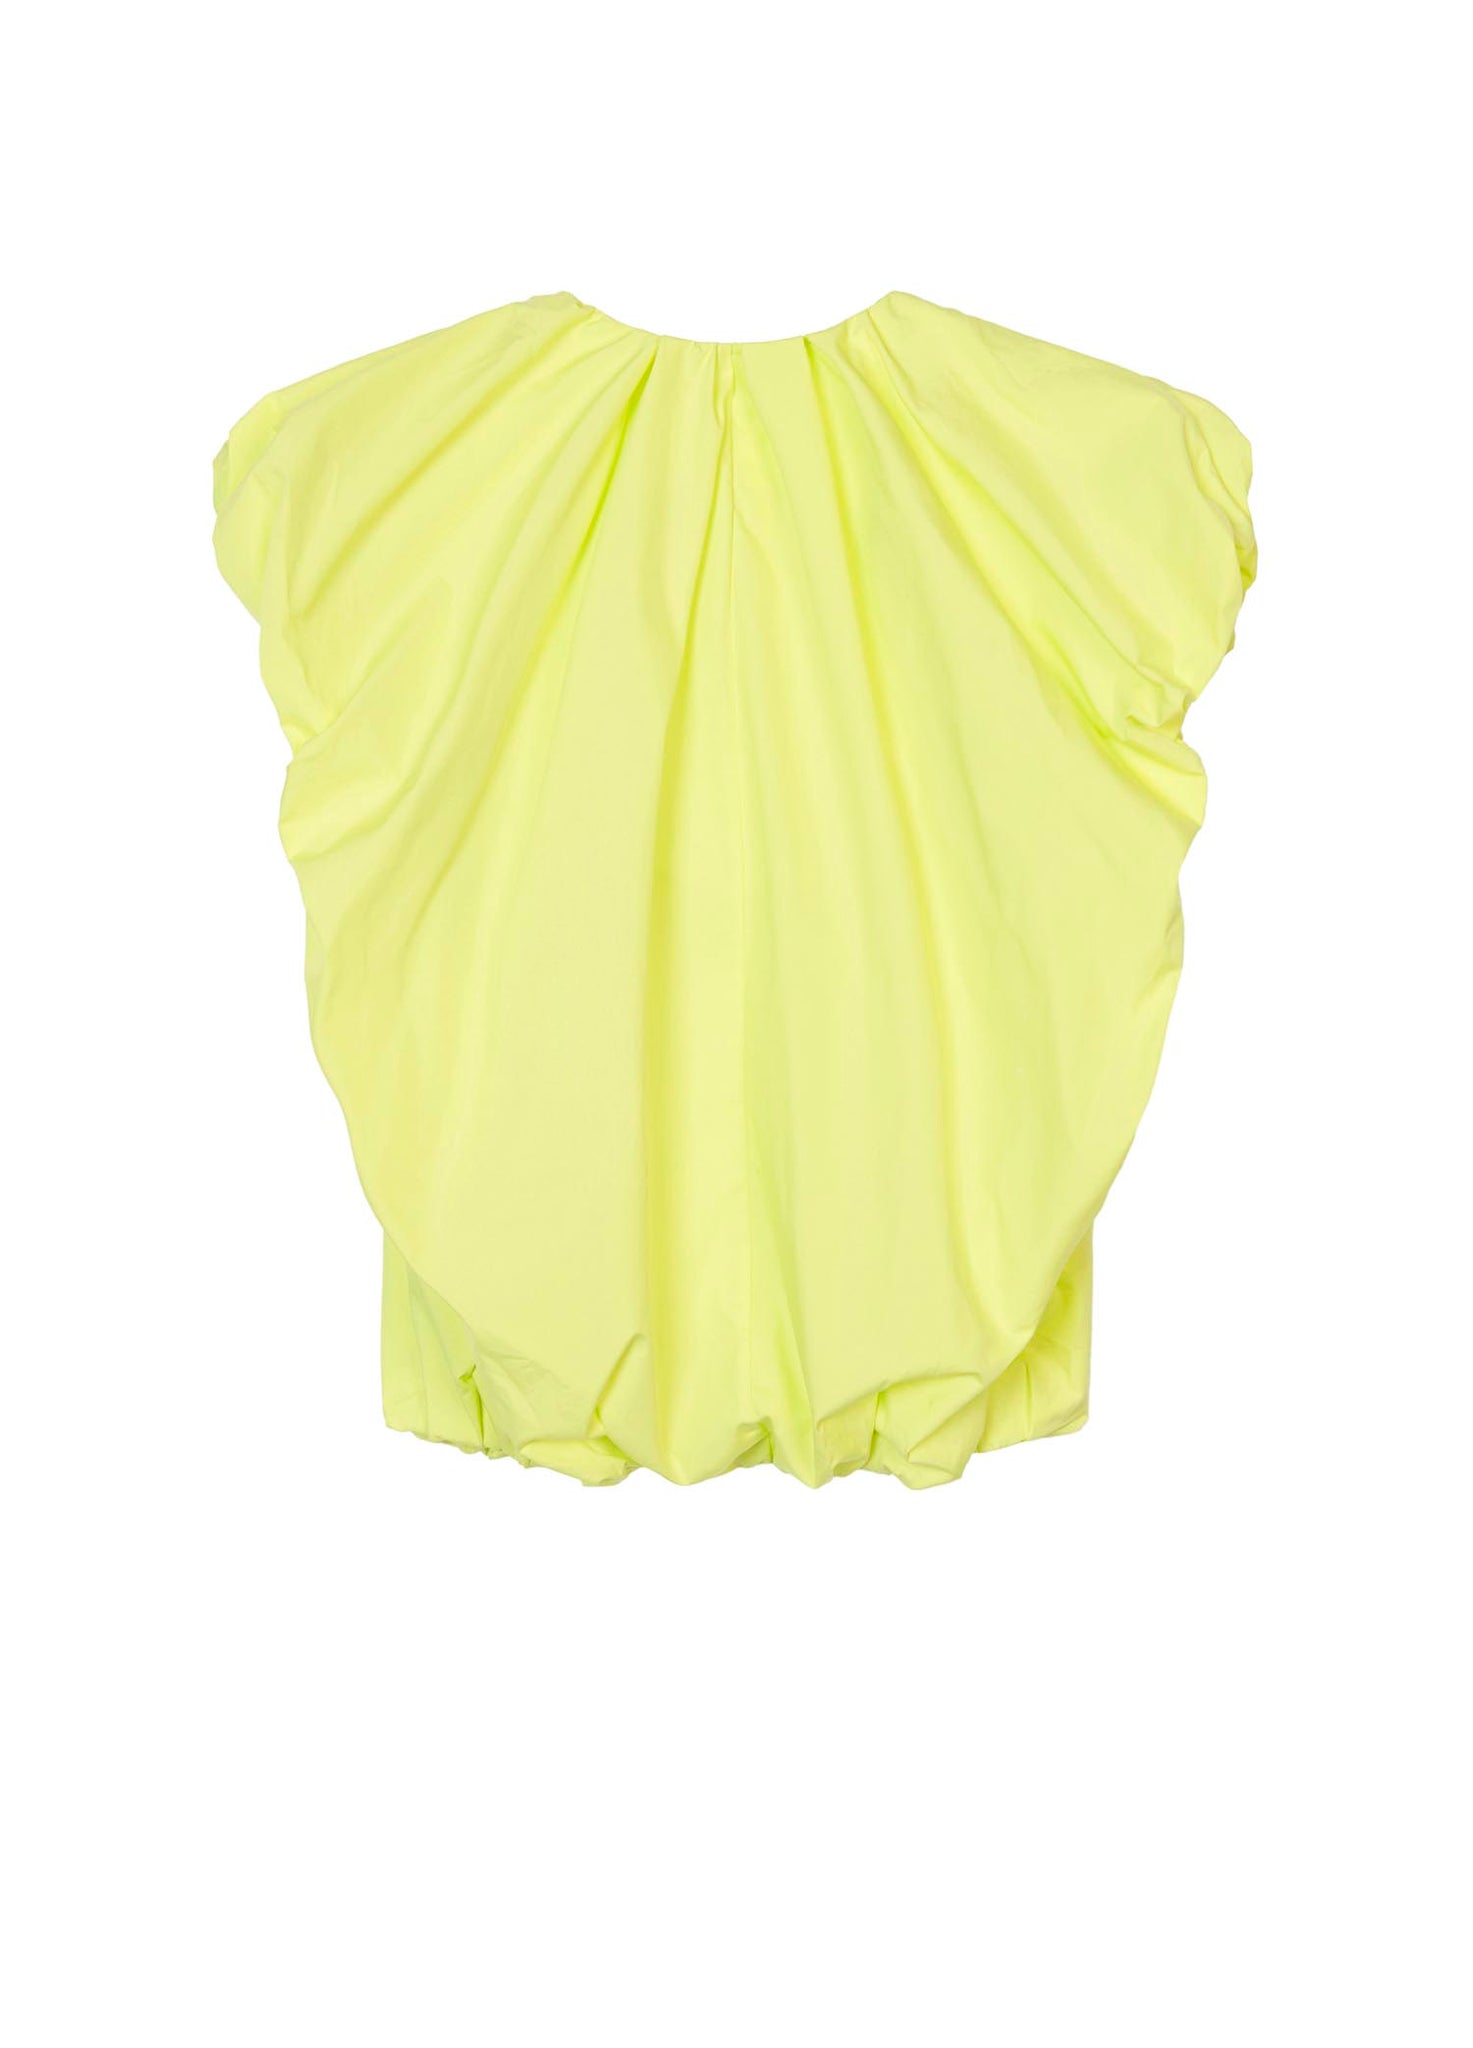 Shirt / JNBY Loose Fit V-Neck Ruffled Sleeveless Top (100% Cotton)